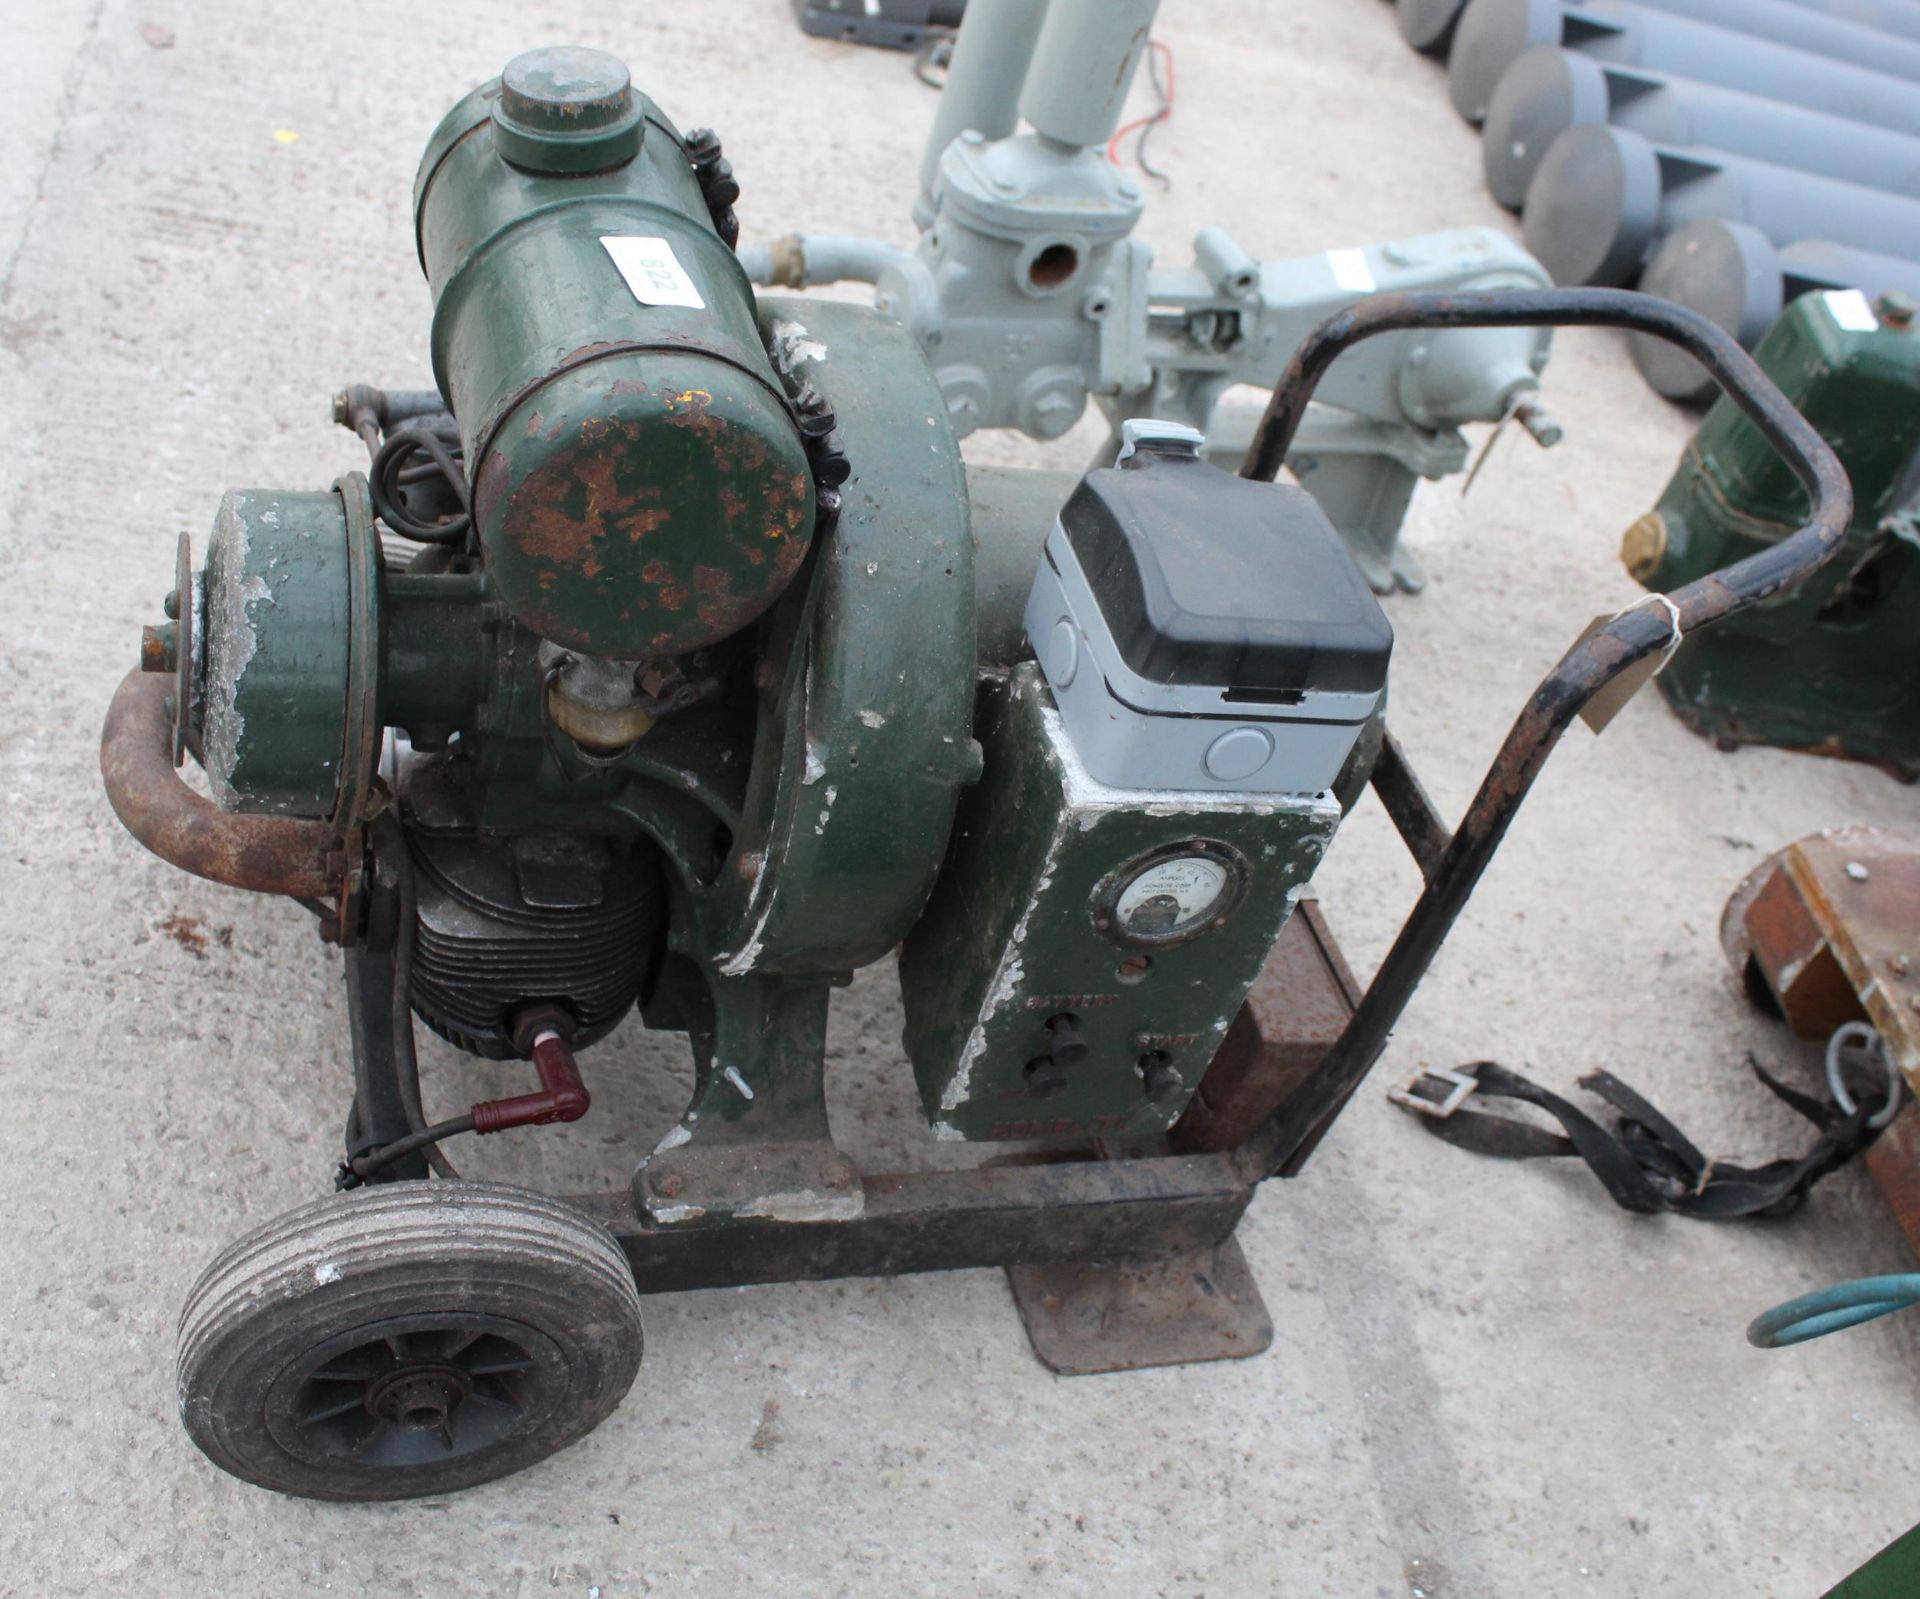 A VINTAGE HOMELITE PETROL GENERATOR ON A FOUR WHEELED TROLLEY BASE (MODERN ELECTRICAL ADDITIONS) - Image 3 of 3